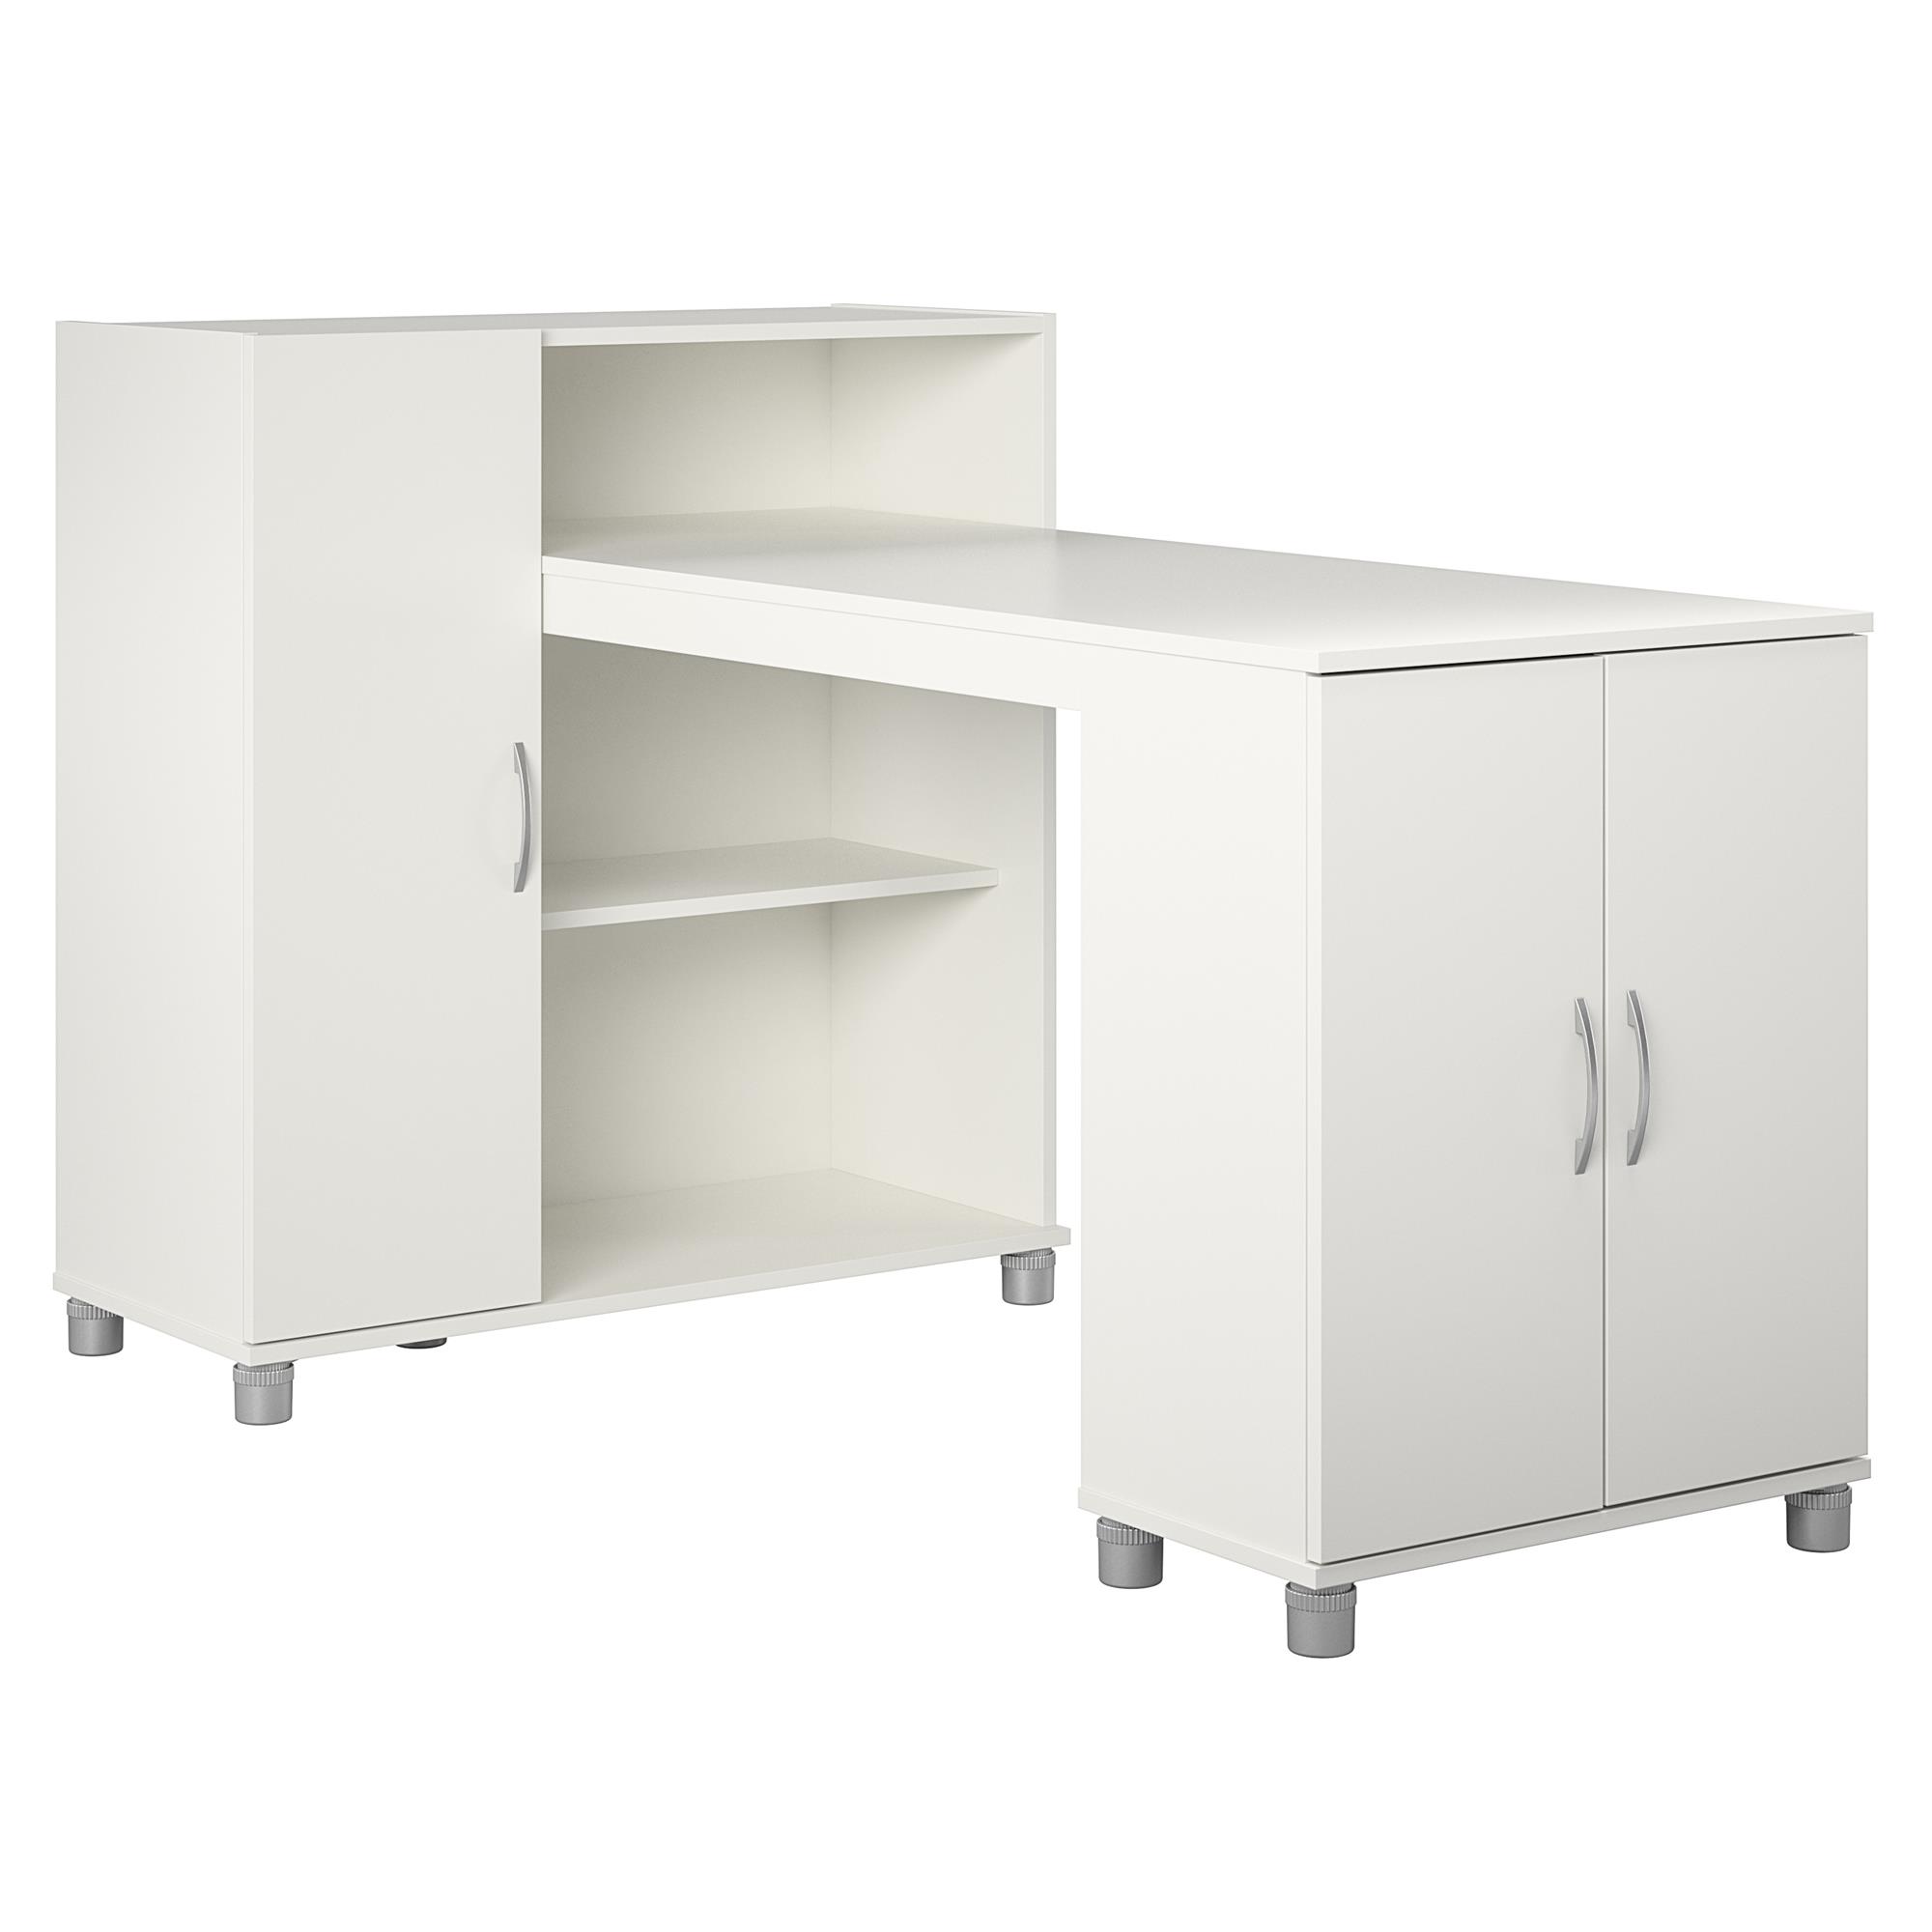 RealRooms Basin Hobby and Craft Desk with Storage, White - image 1 of 9